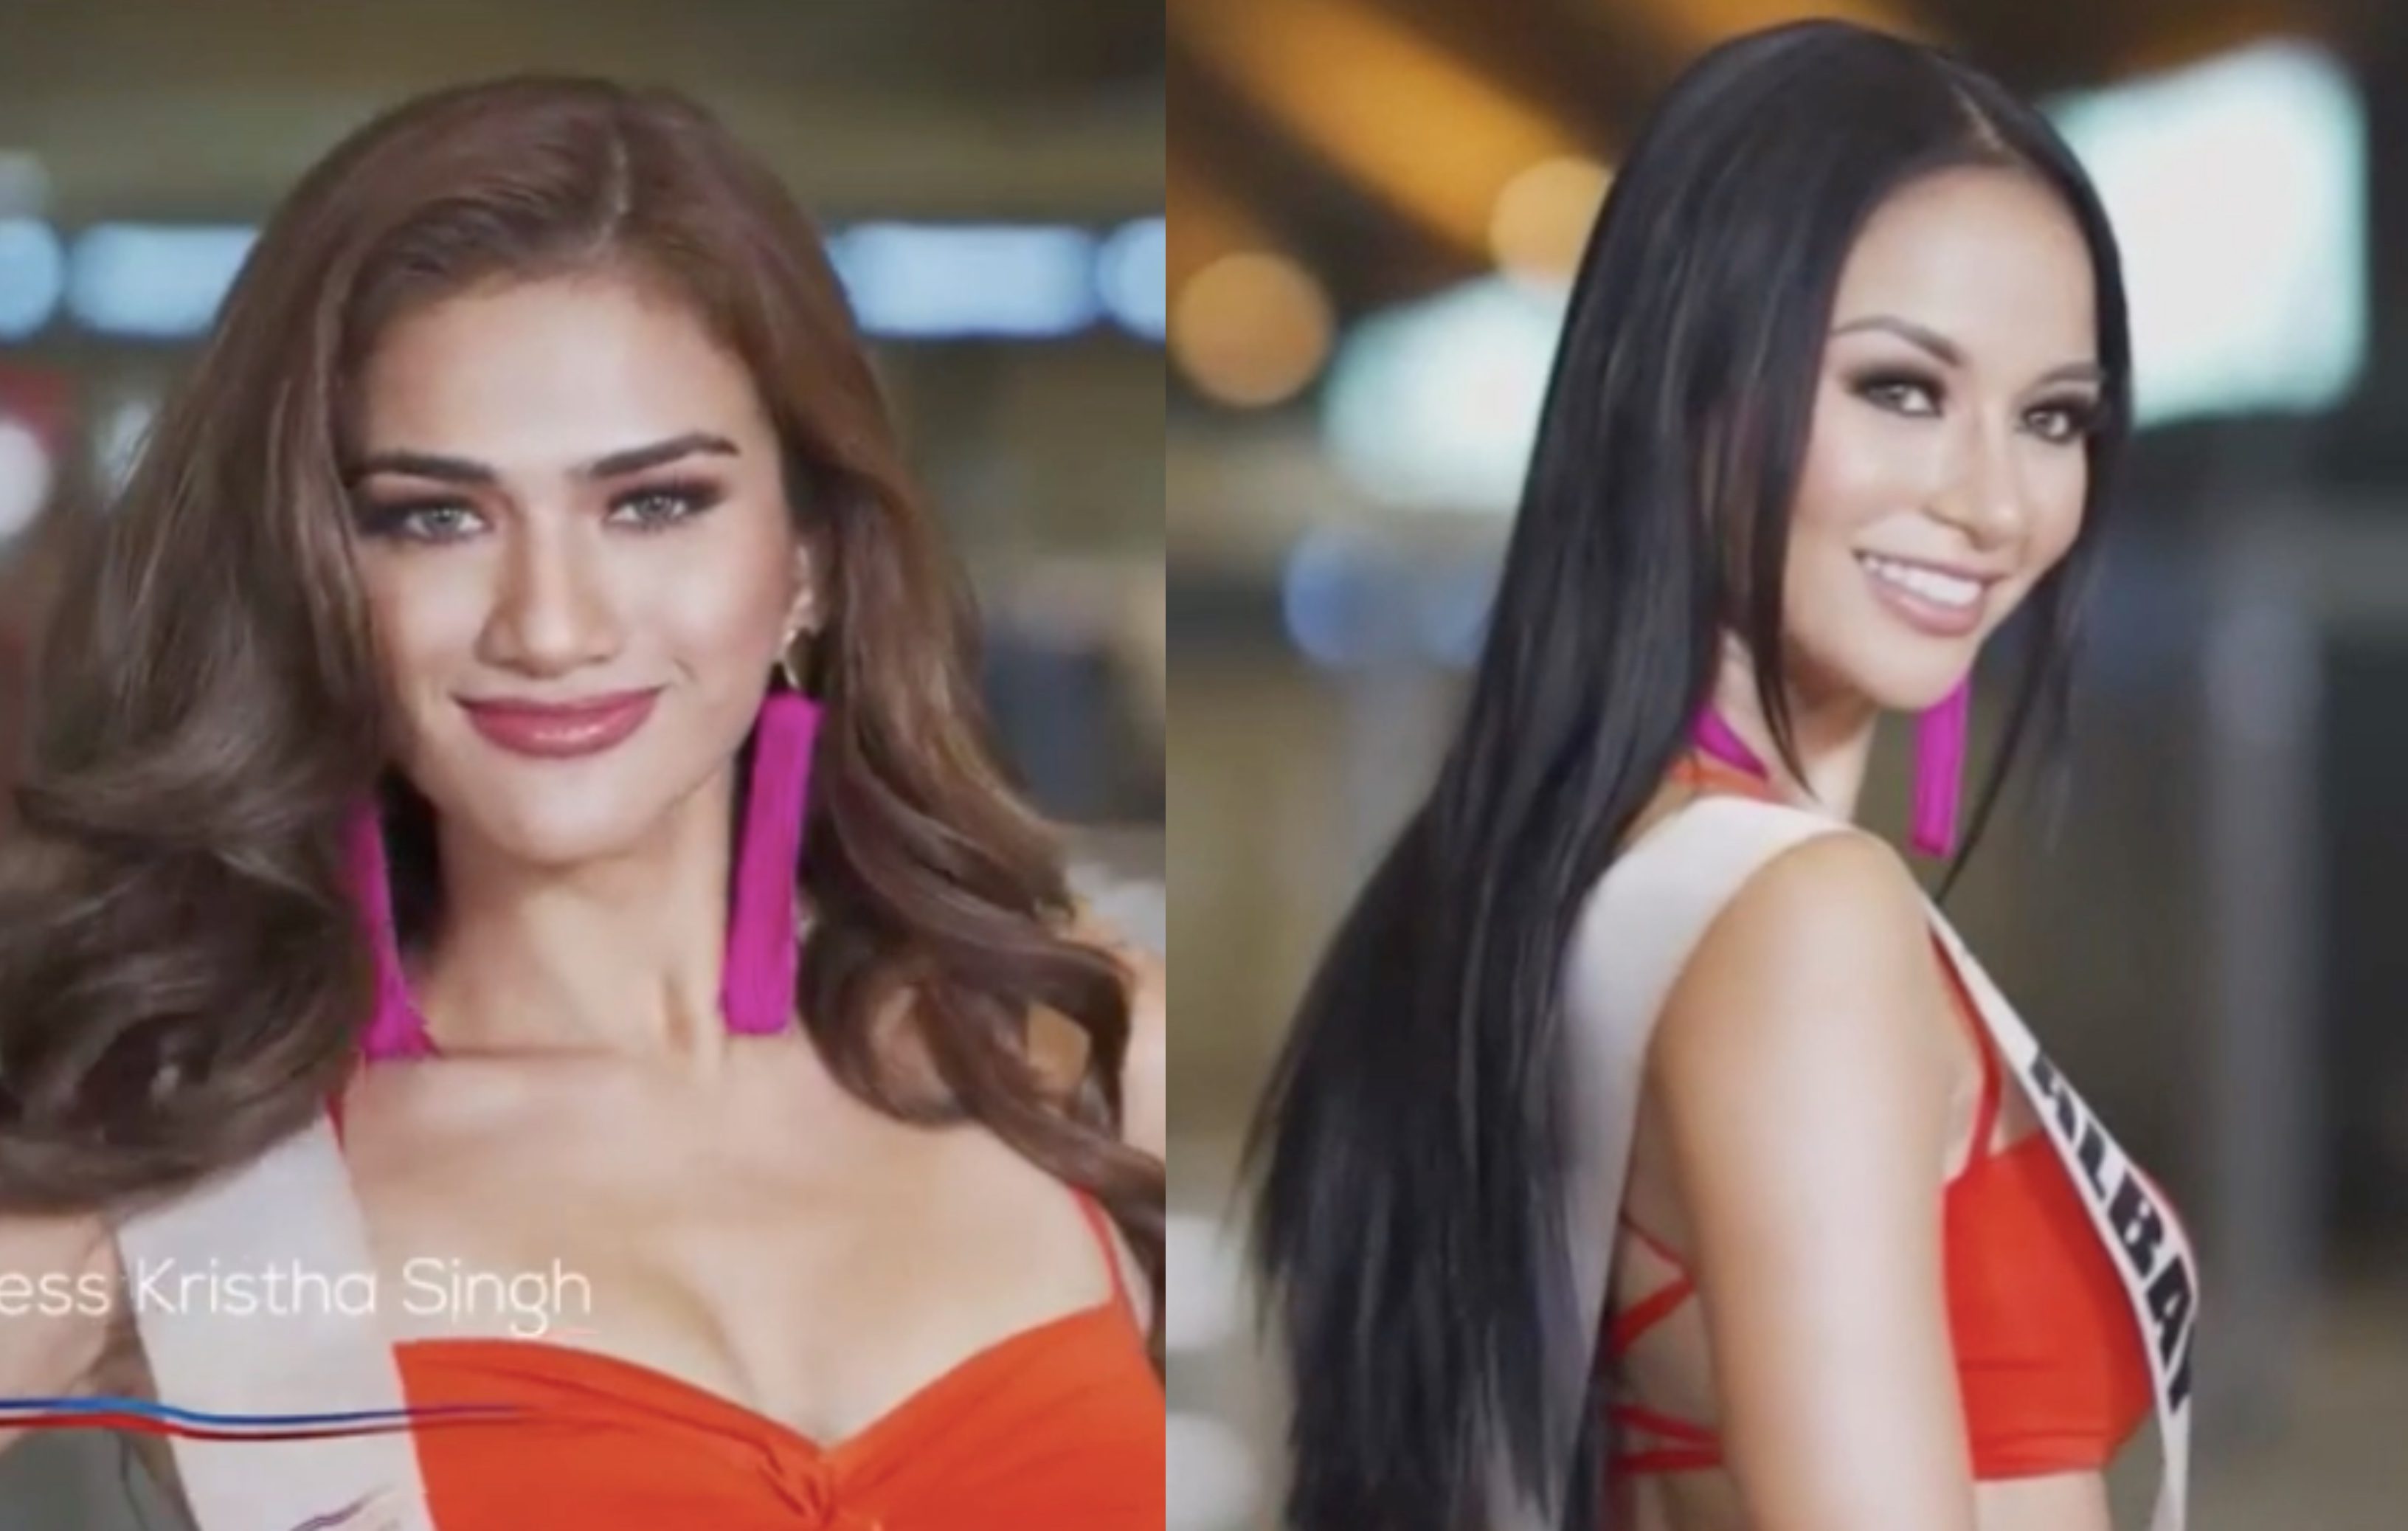 IN PHOTOS: Miss Universe PH 2021 candidates at the preliminary swimsuit competition